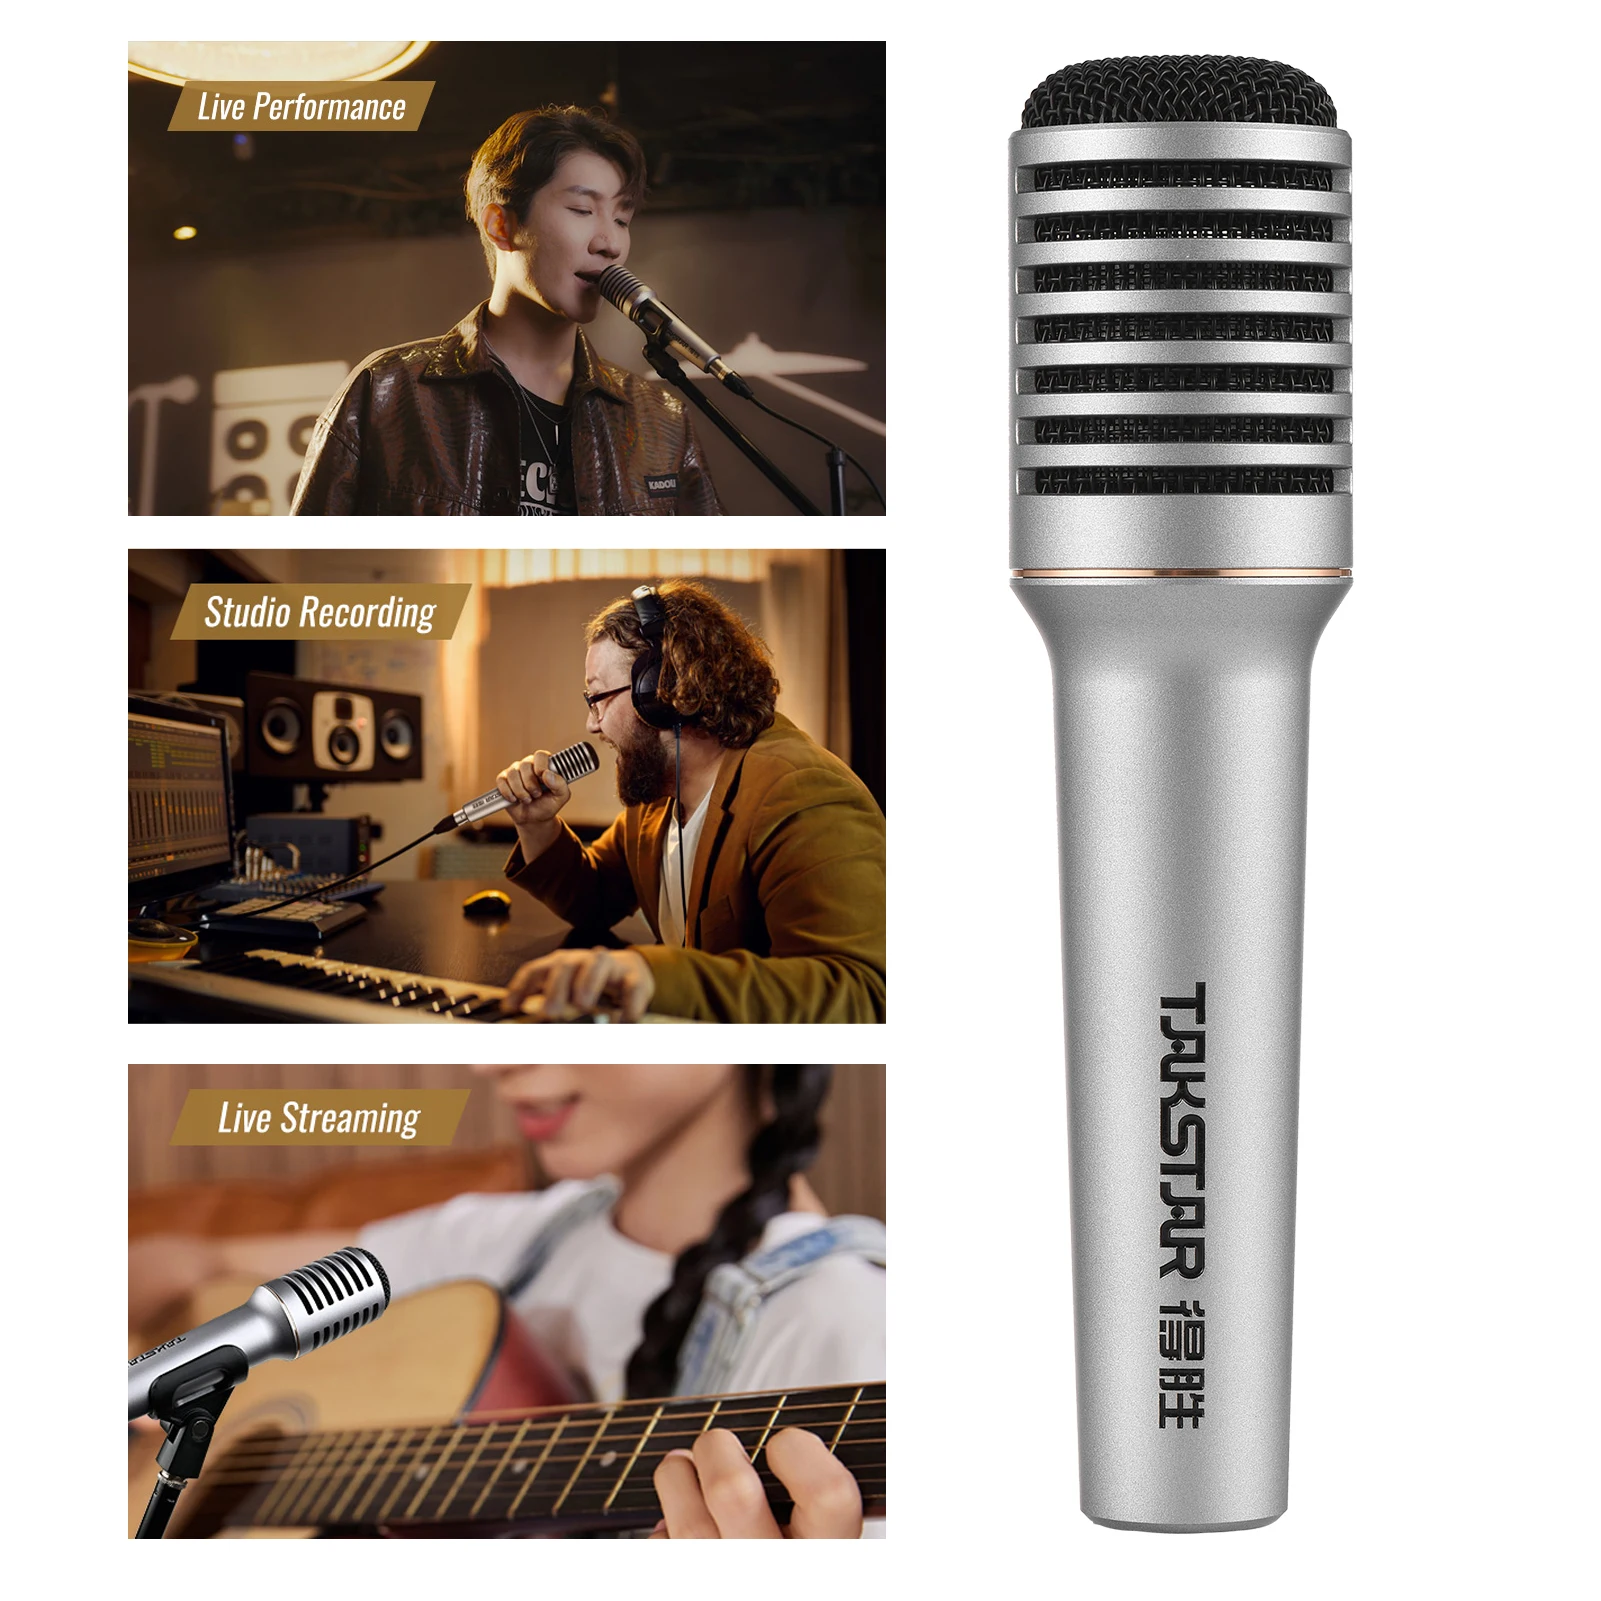 TAKSTAR TA-68 Profession Dynamic Microphone Dynamic Handheld Cardioid Condenser Wireless Microphone live performance images - 6